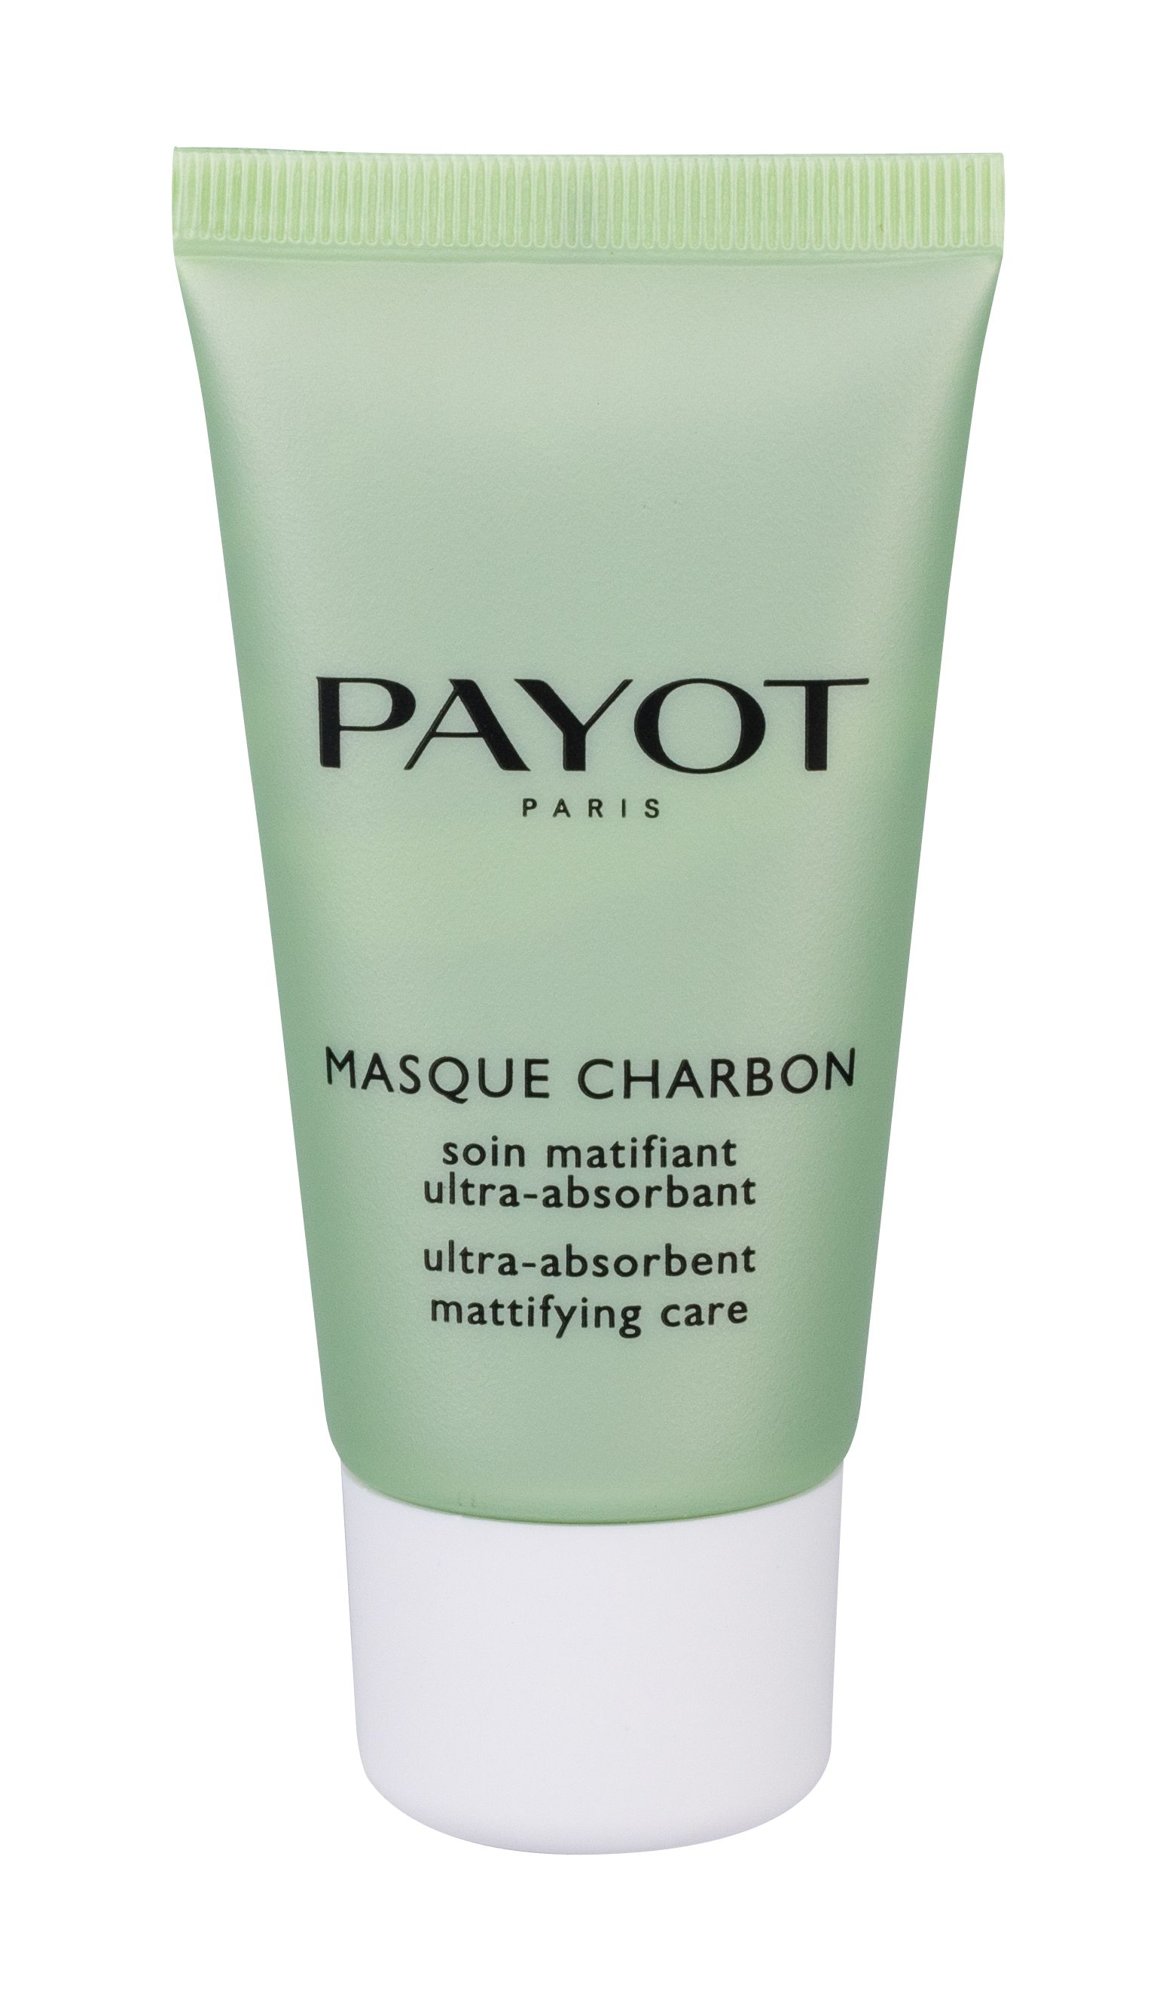 Payot Pate Grise Ultra-Absorbent Mattifying Care